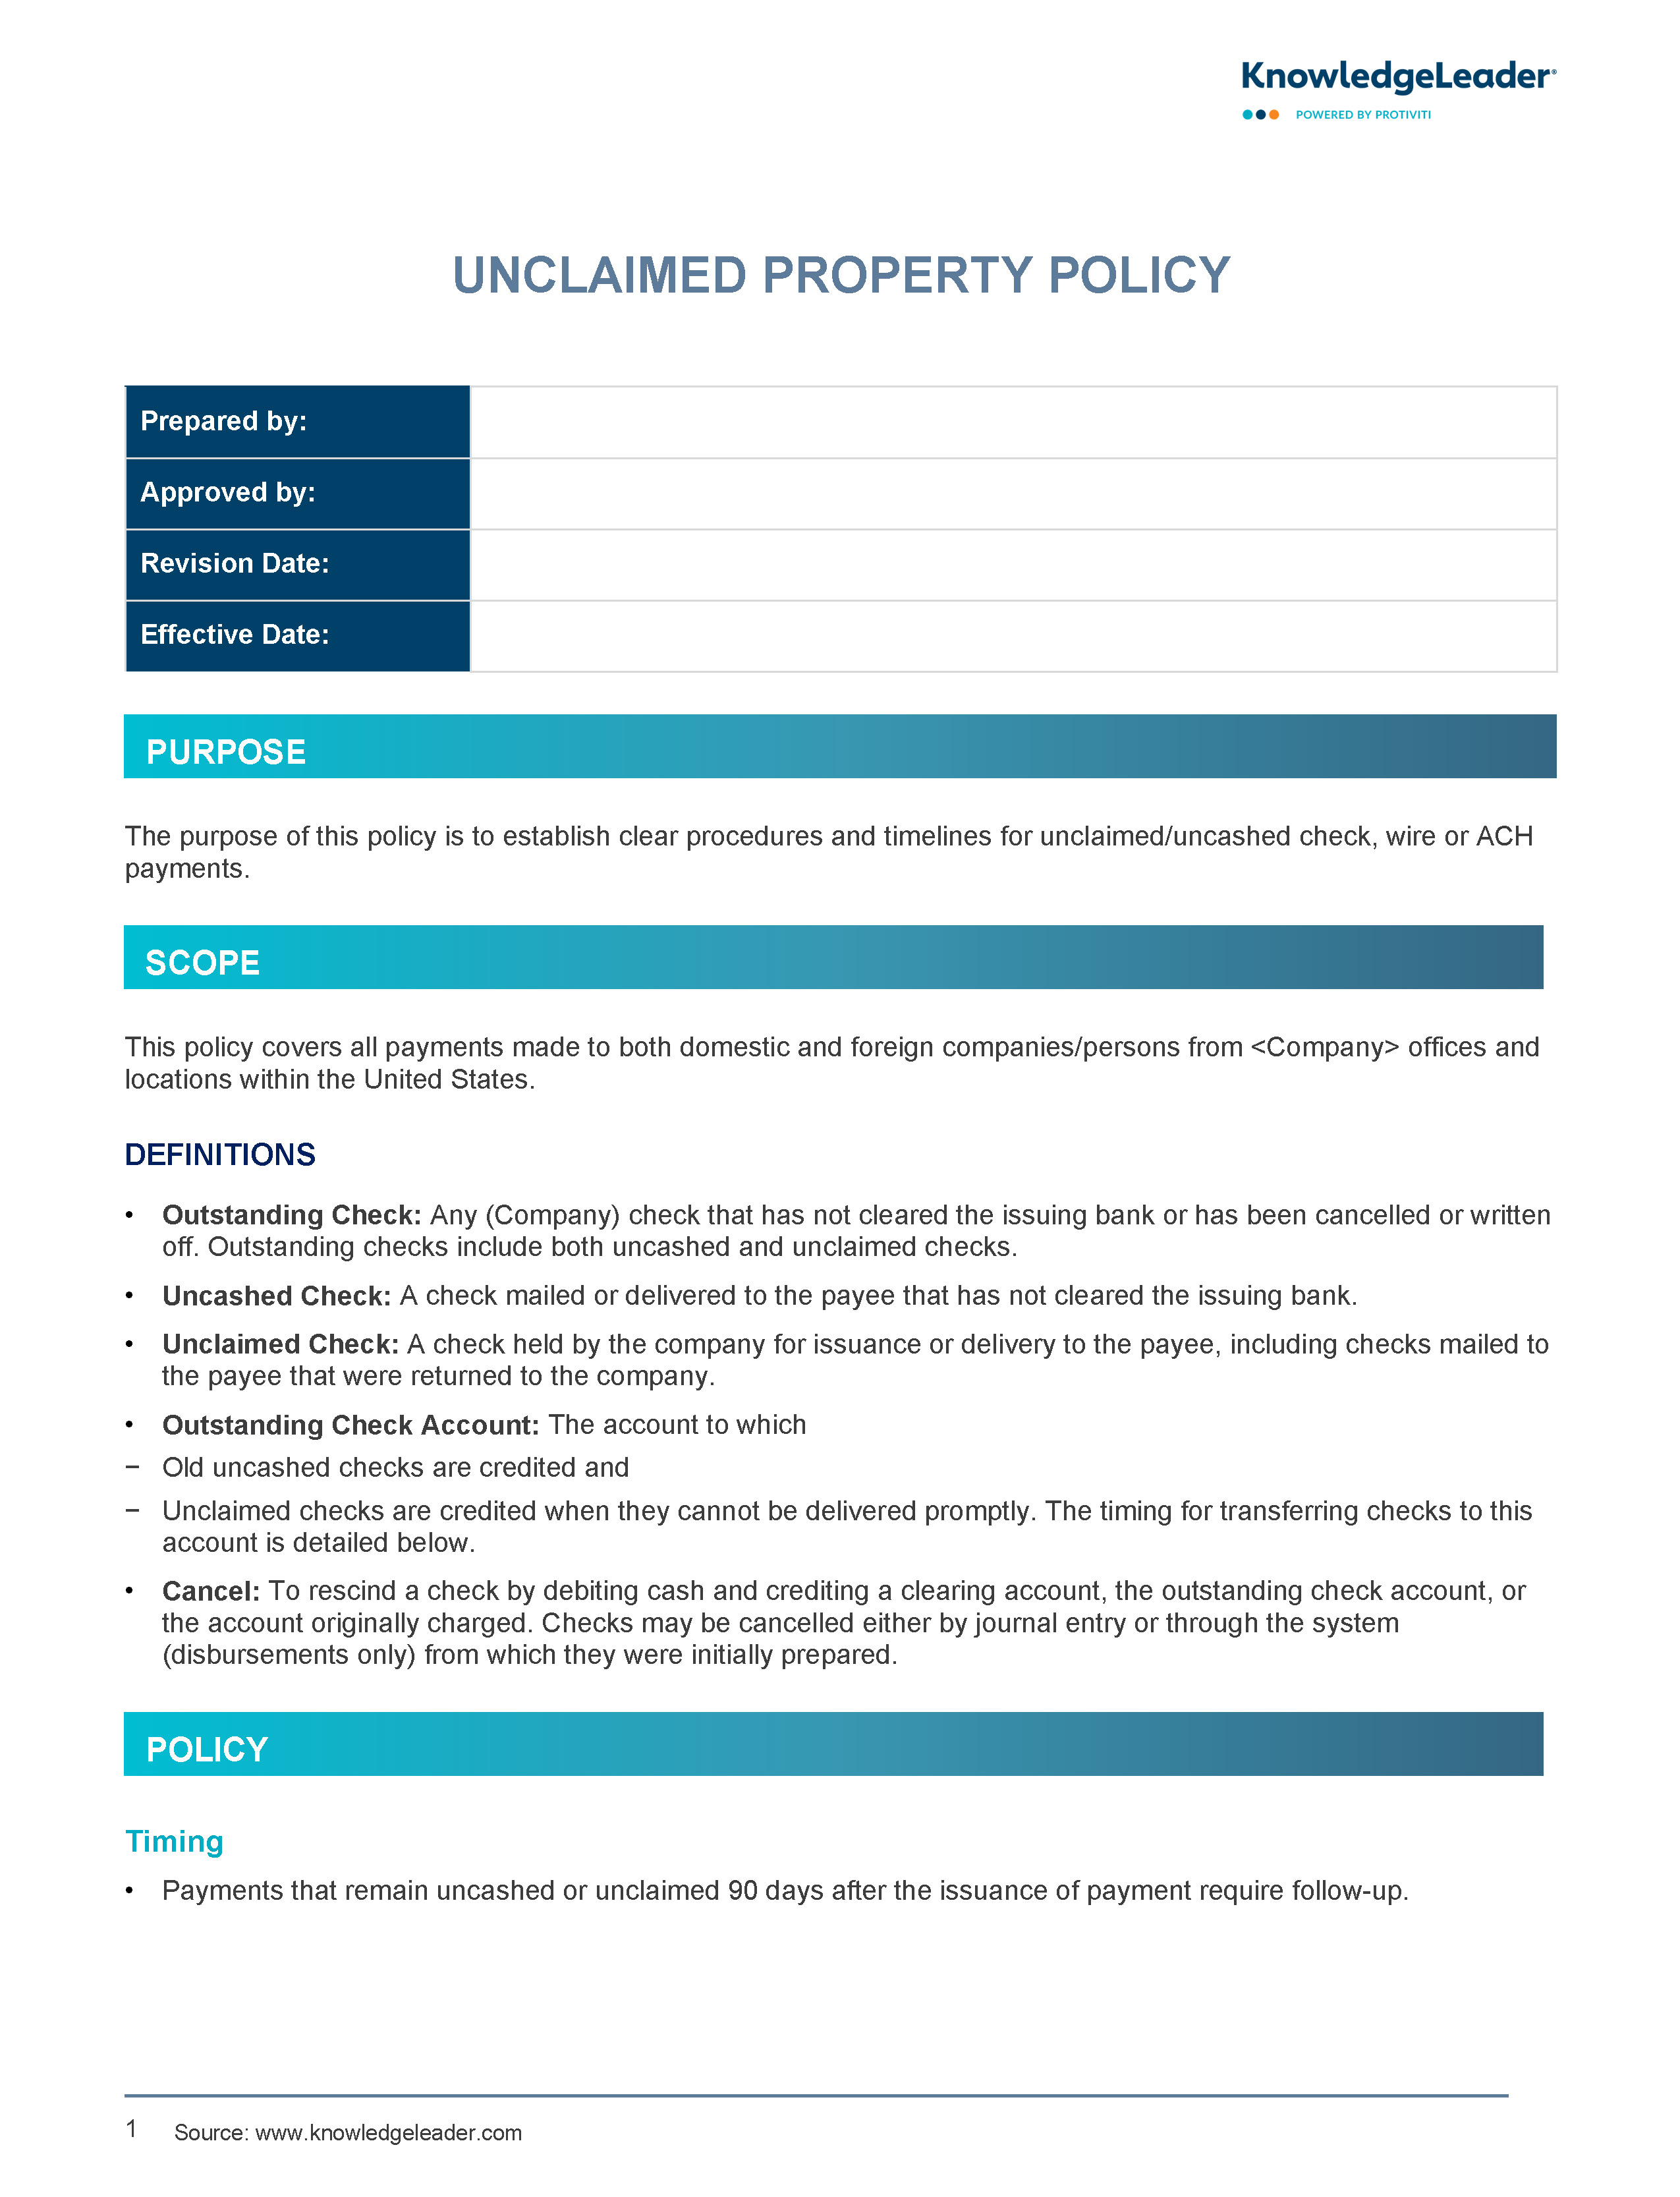 Screenshot of the first page of Unclaimed Property Policy